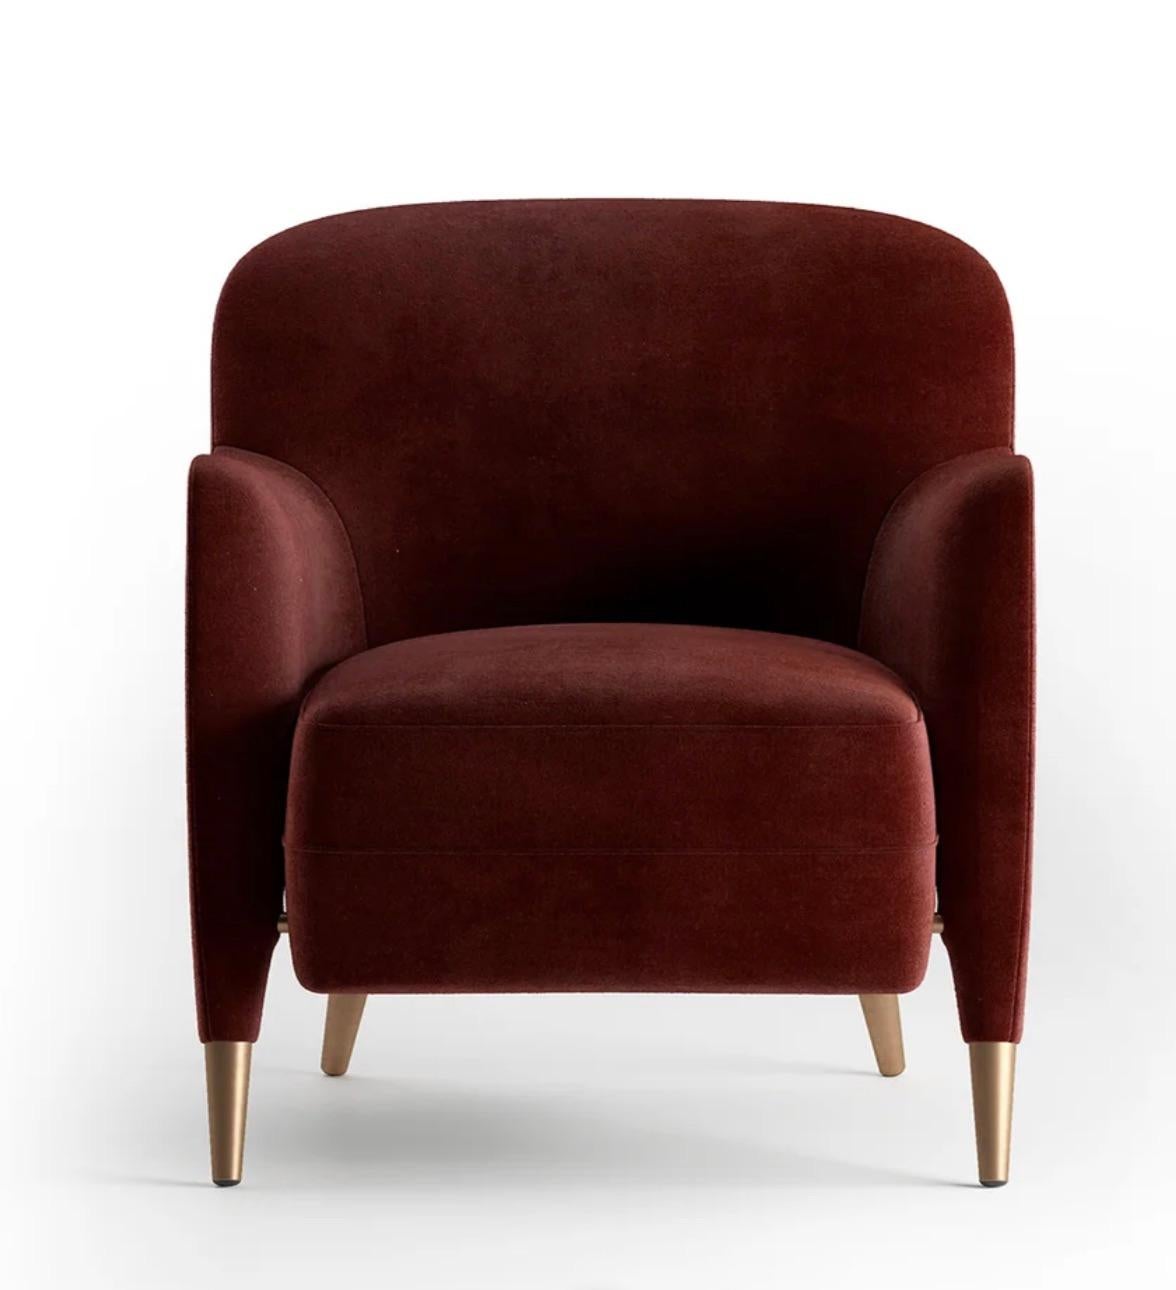 Gio Ponti leaned on nautical inspiration to design this armchair that was destined for use on ocean liners and today is a part of Molteni&C's Heritage Collection. A contoured backrest provides support and style while a solid wood structure and